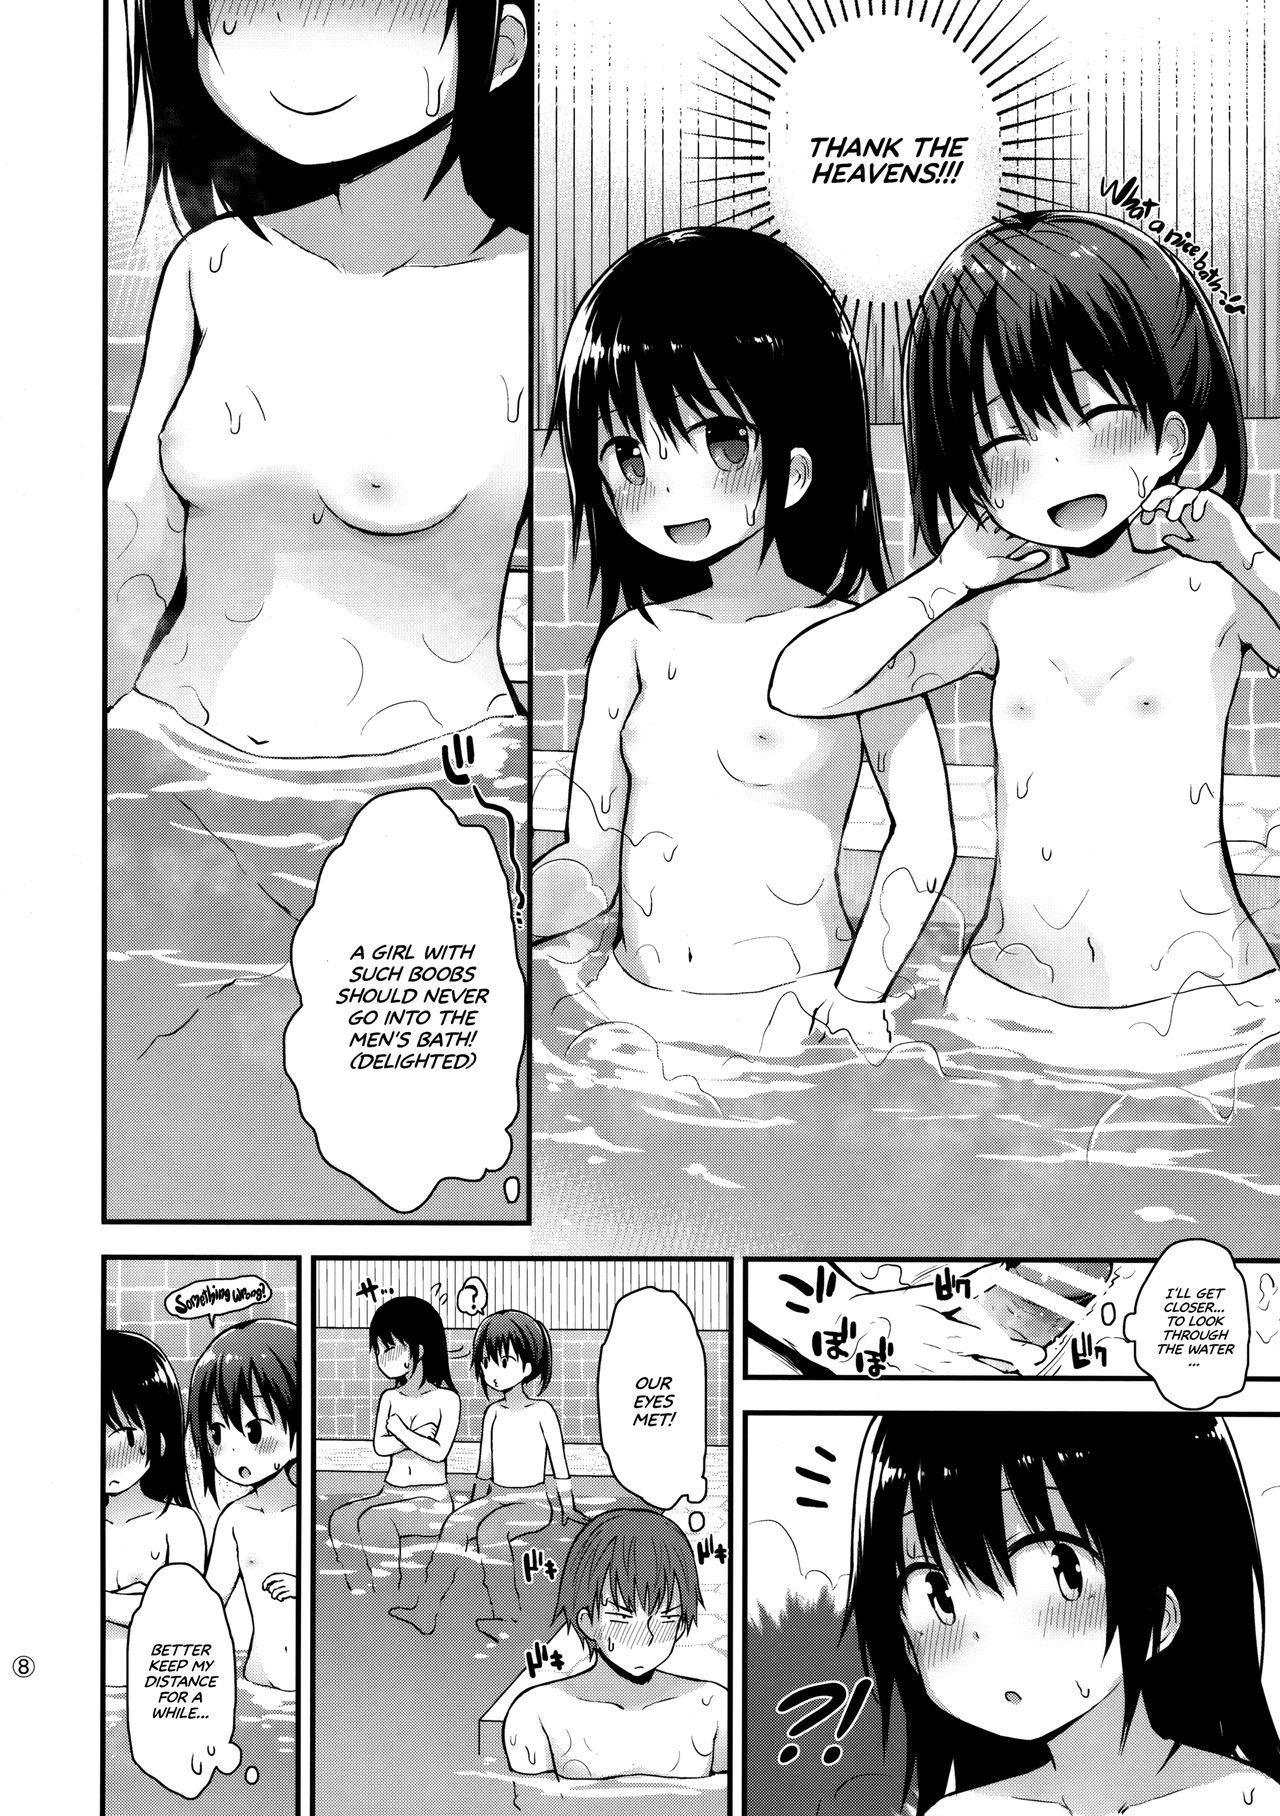 Follada Onnanoko datte Otokoyu ni Hairitai | They may just be little girls, but they still want to enter the men's bath! - Original Blowing - Page 7